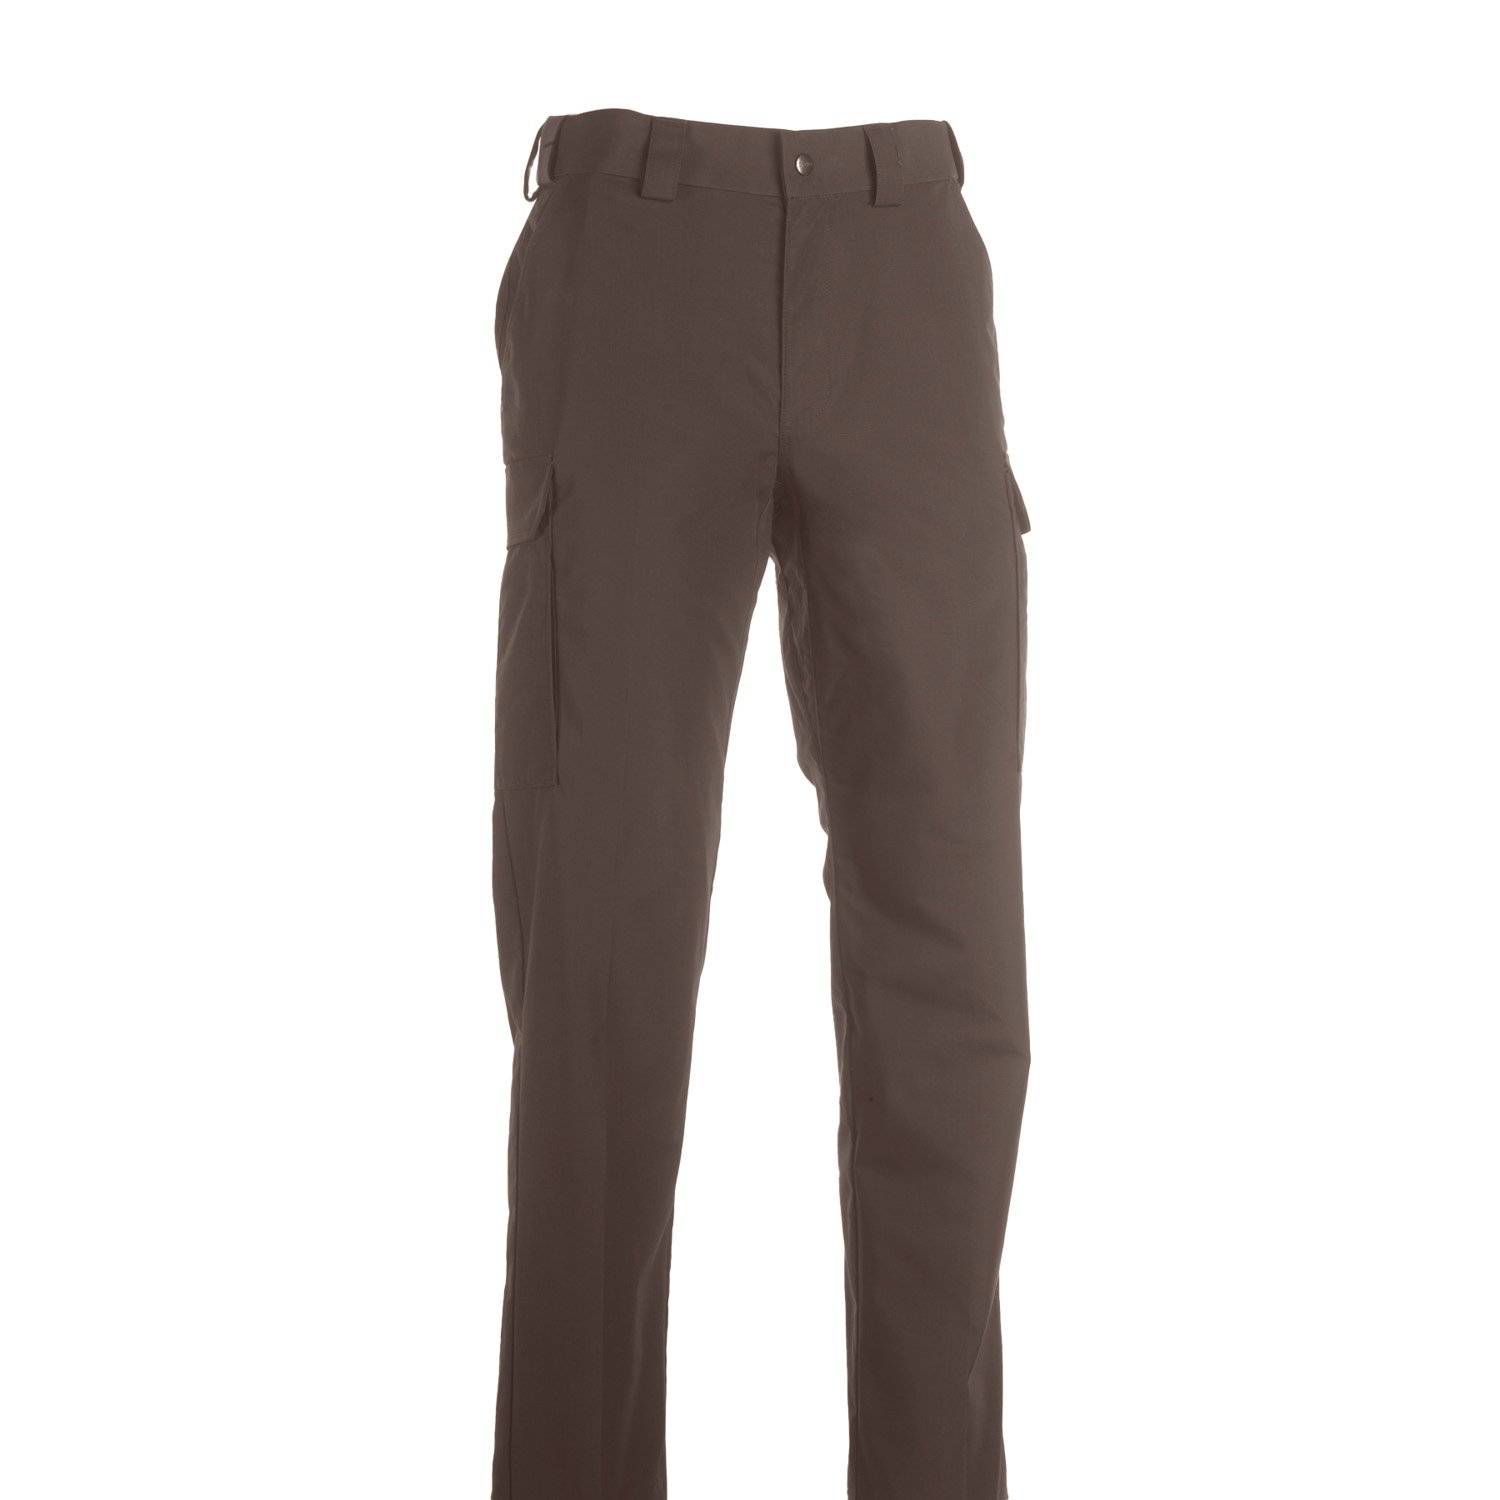 Ladies Cargo Combat Work Trousers Size 6 to 26 in Black or Navy By SITE  KING